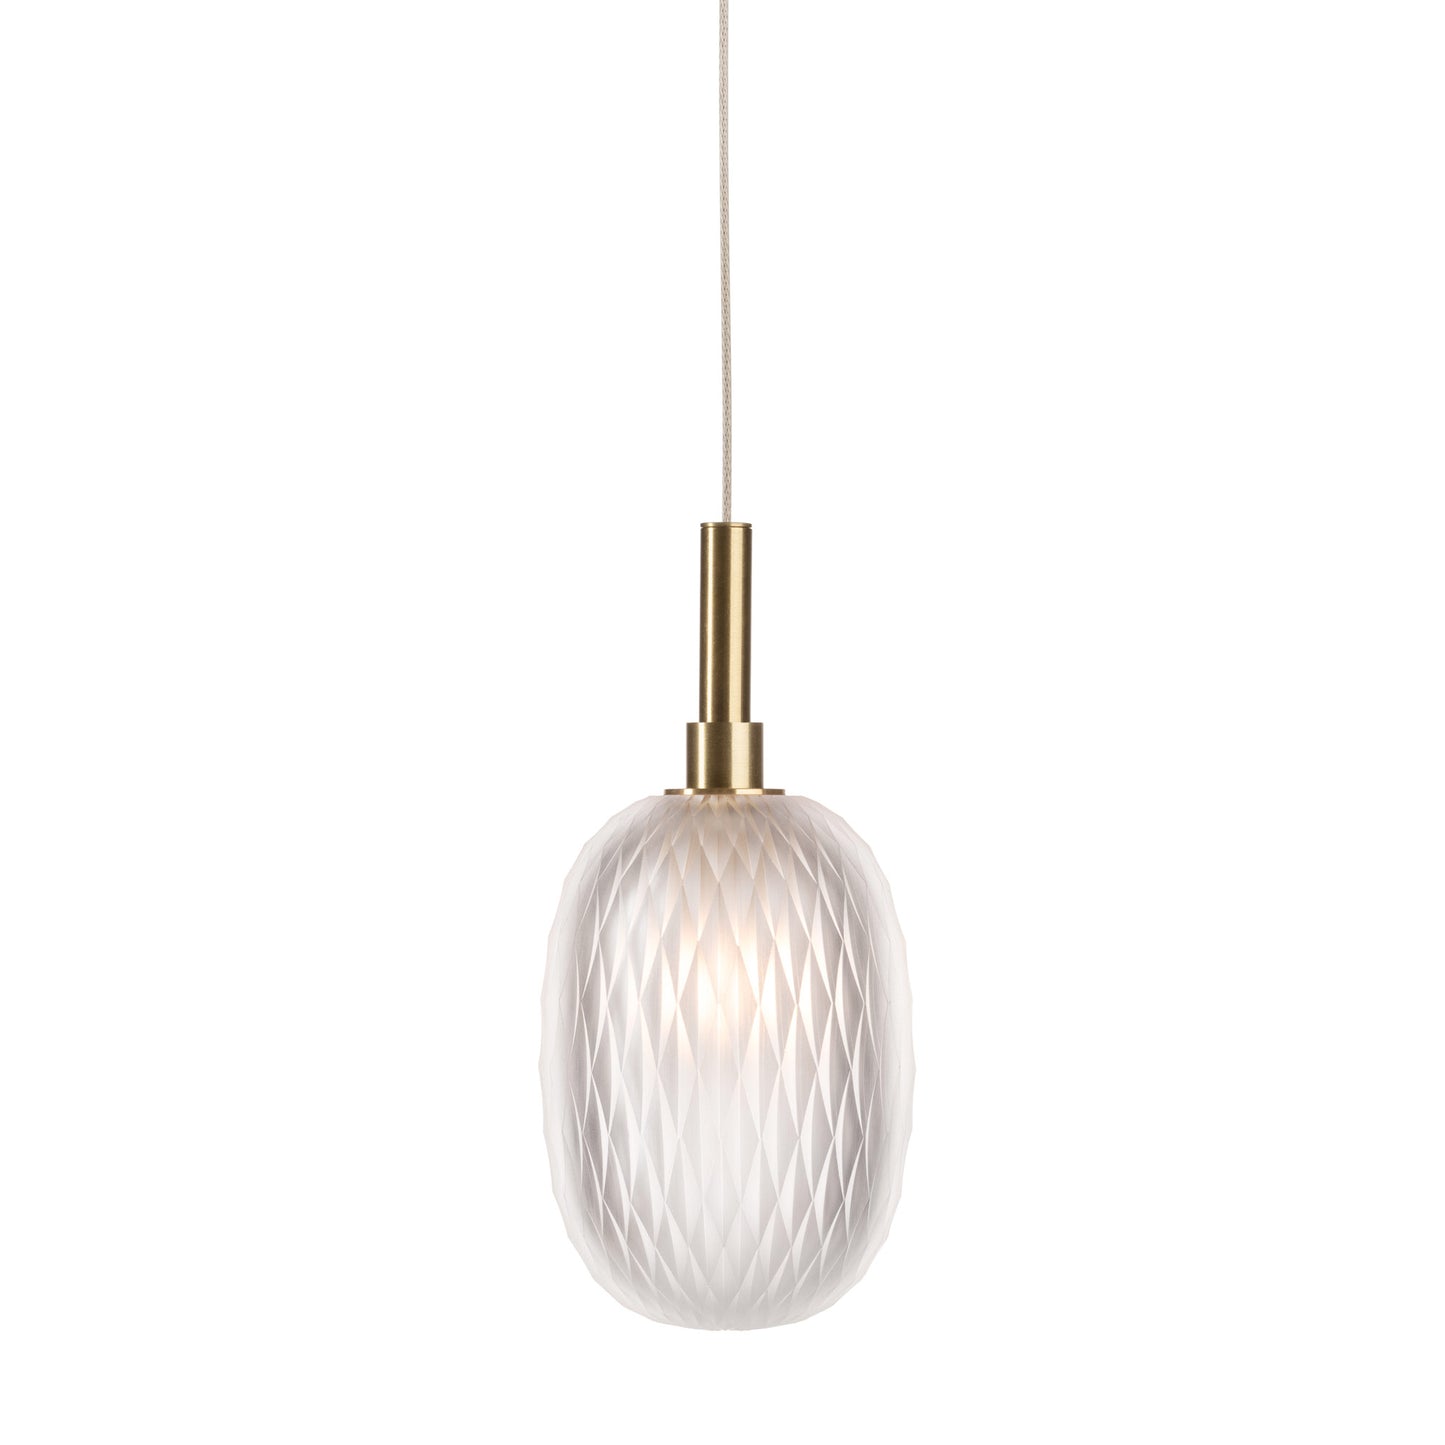 BOMMA - METAMORPHOSIS CLEAR PENDANT - from $1,900.00